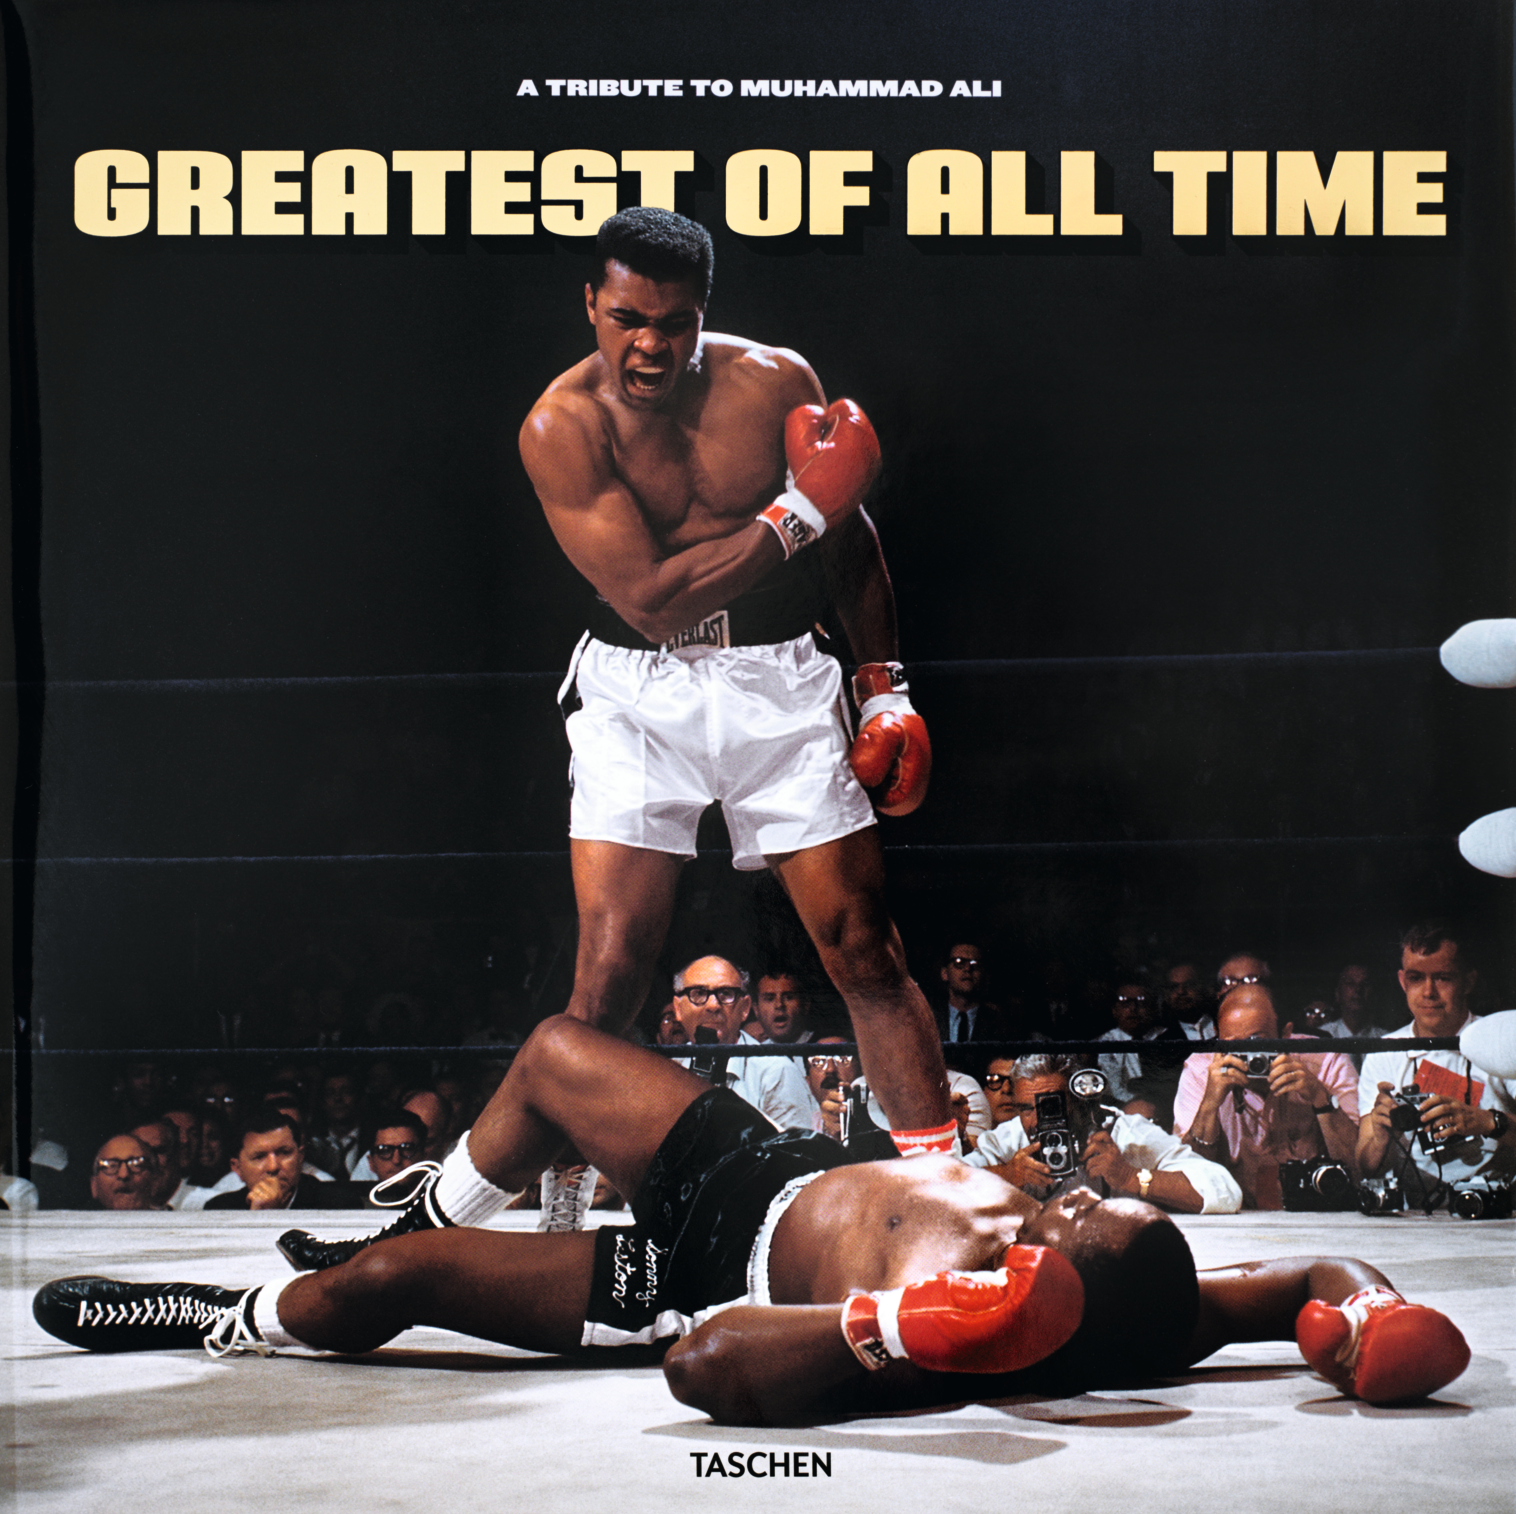 GOAT – Greatest of All Time. A Tribute to Muhammad Ali